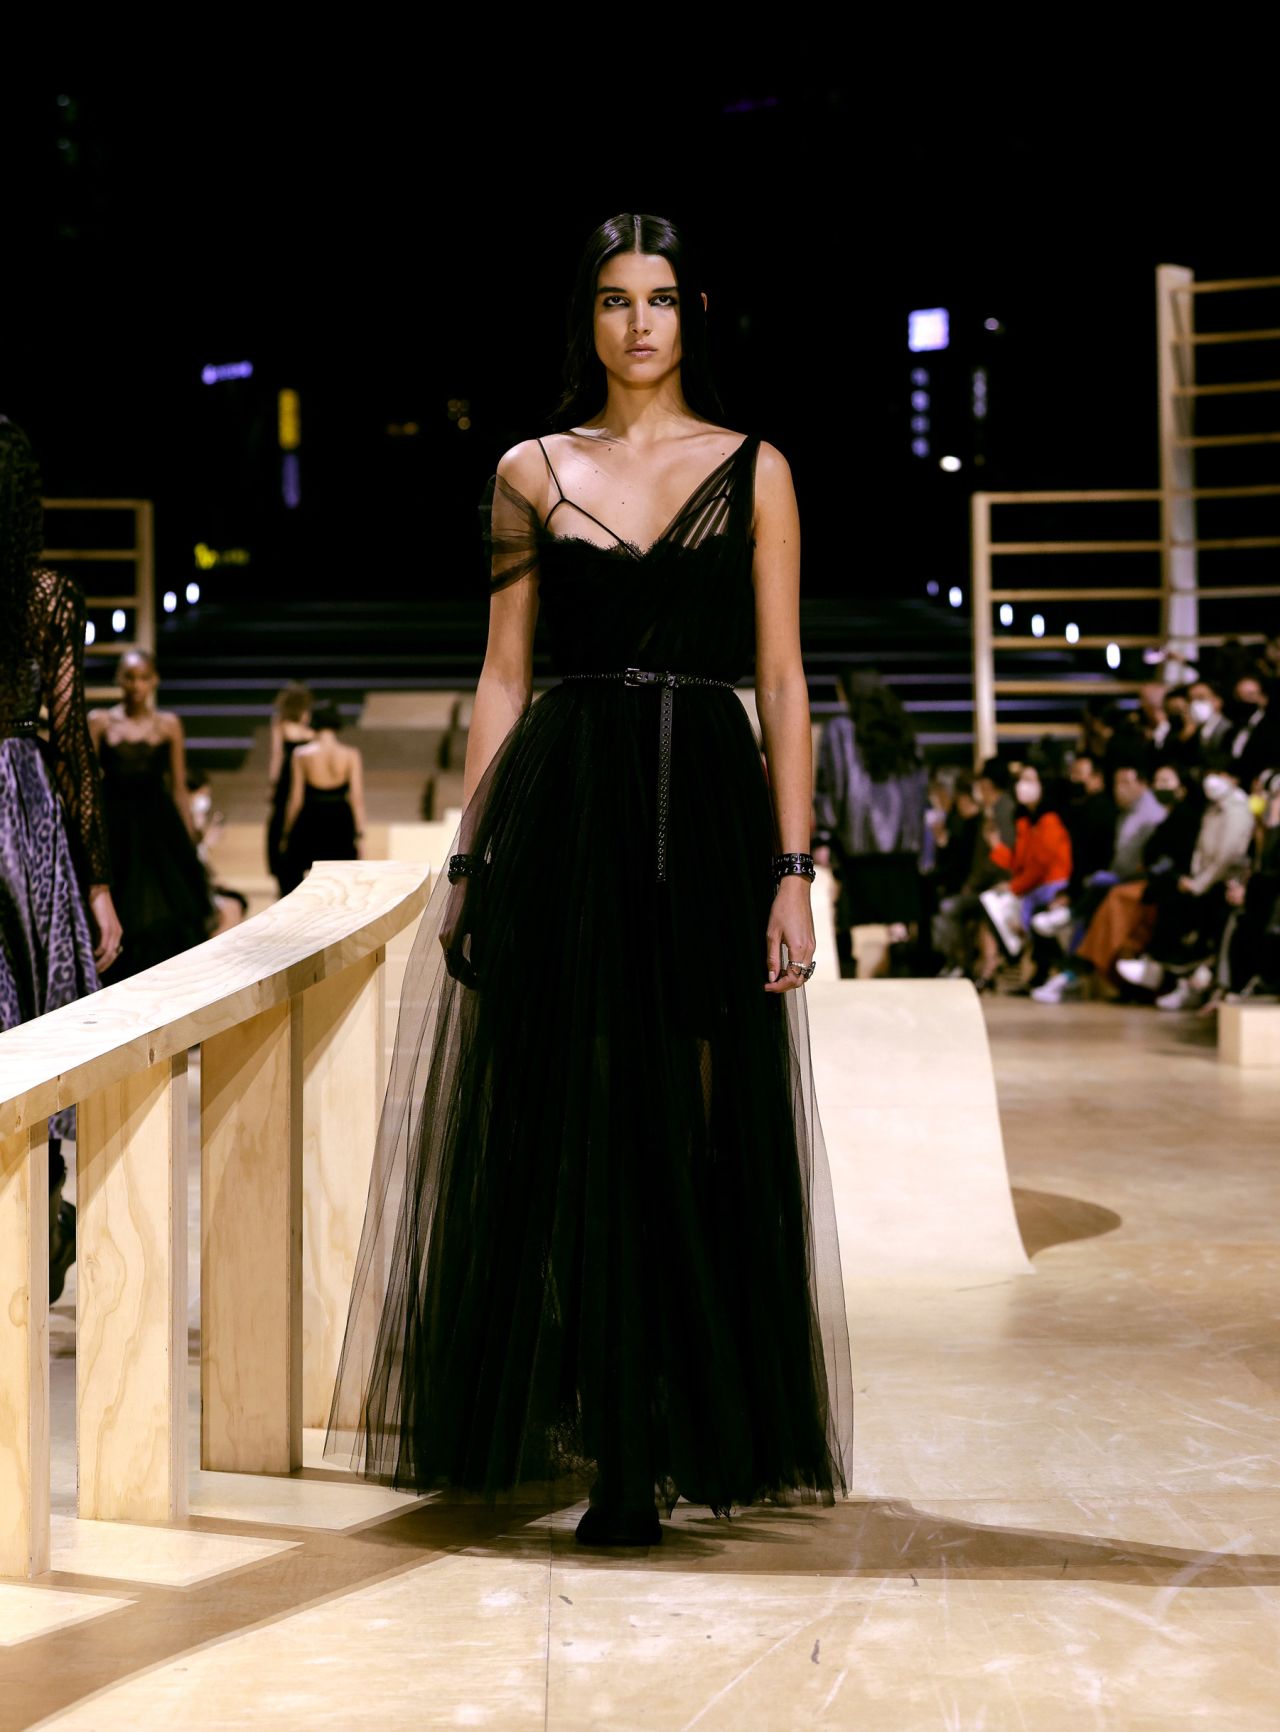 A look from Dior's Fall 2022 collection.